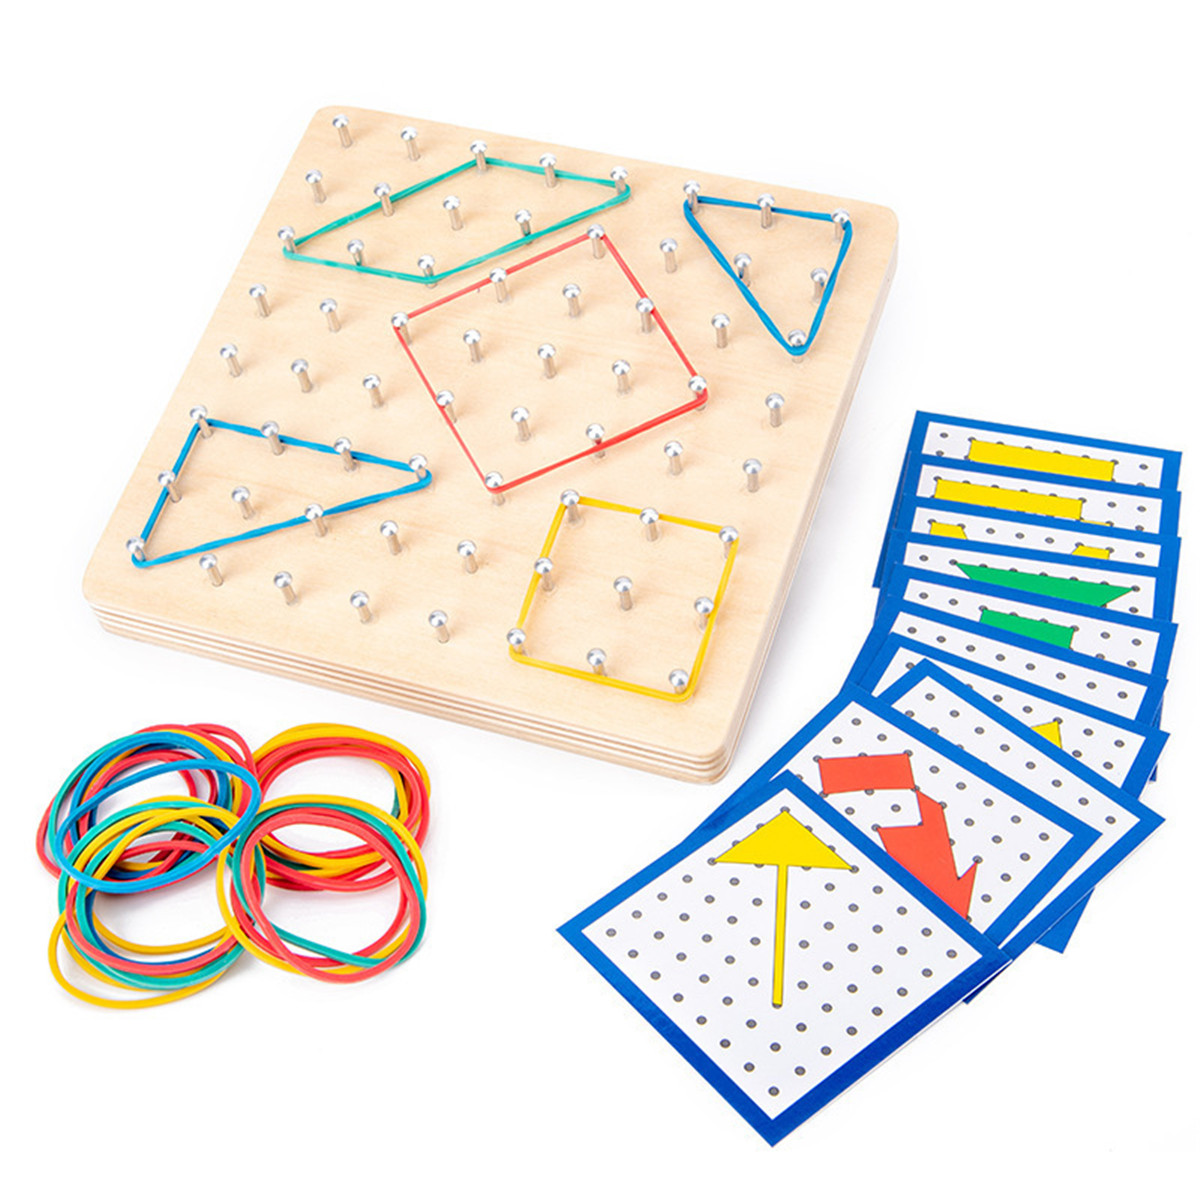 Montessori-Traditional-Teaching-Geometry-Puzzle-Pattern-Educational-School-Home-Game-Toy-for-Kids-Gi-1726969-3